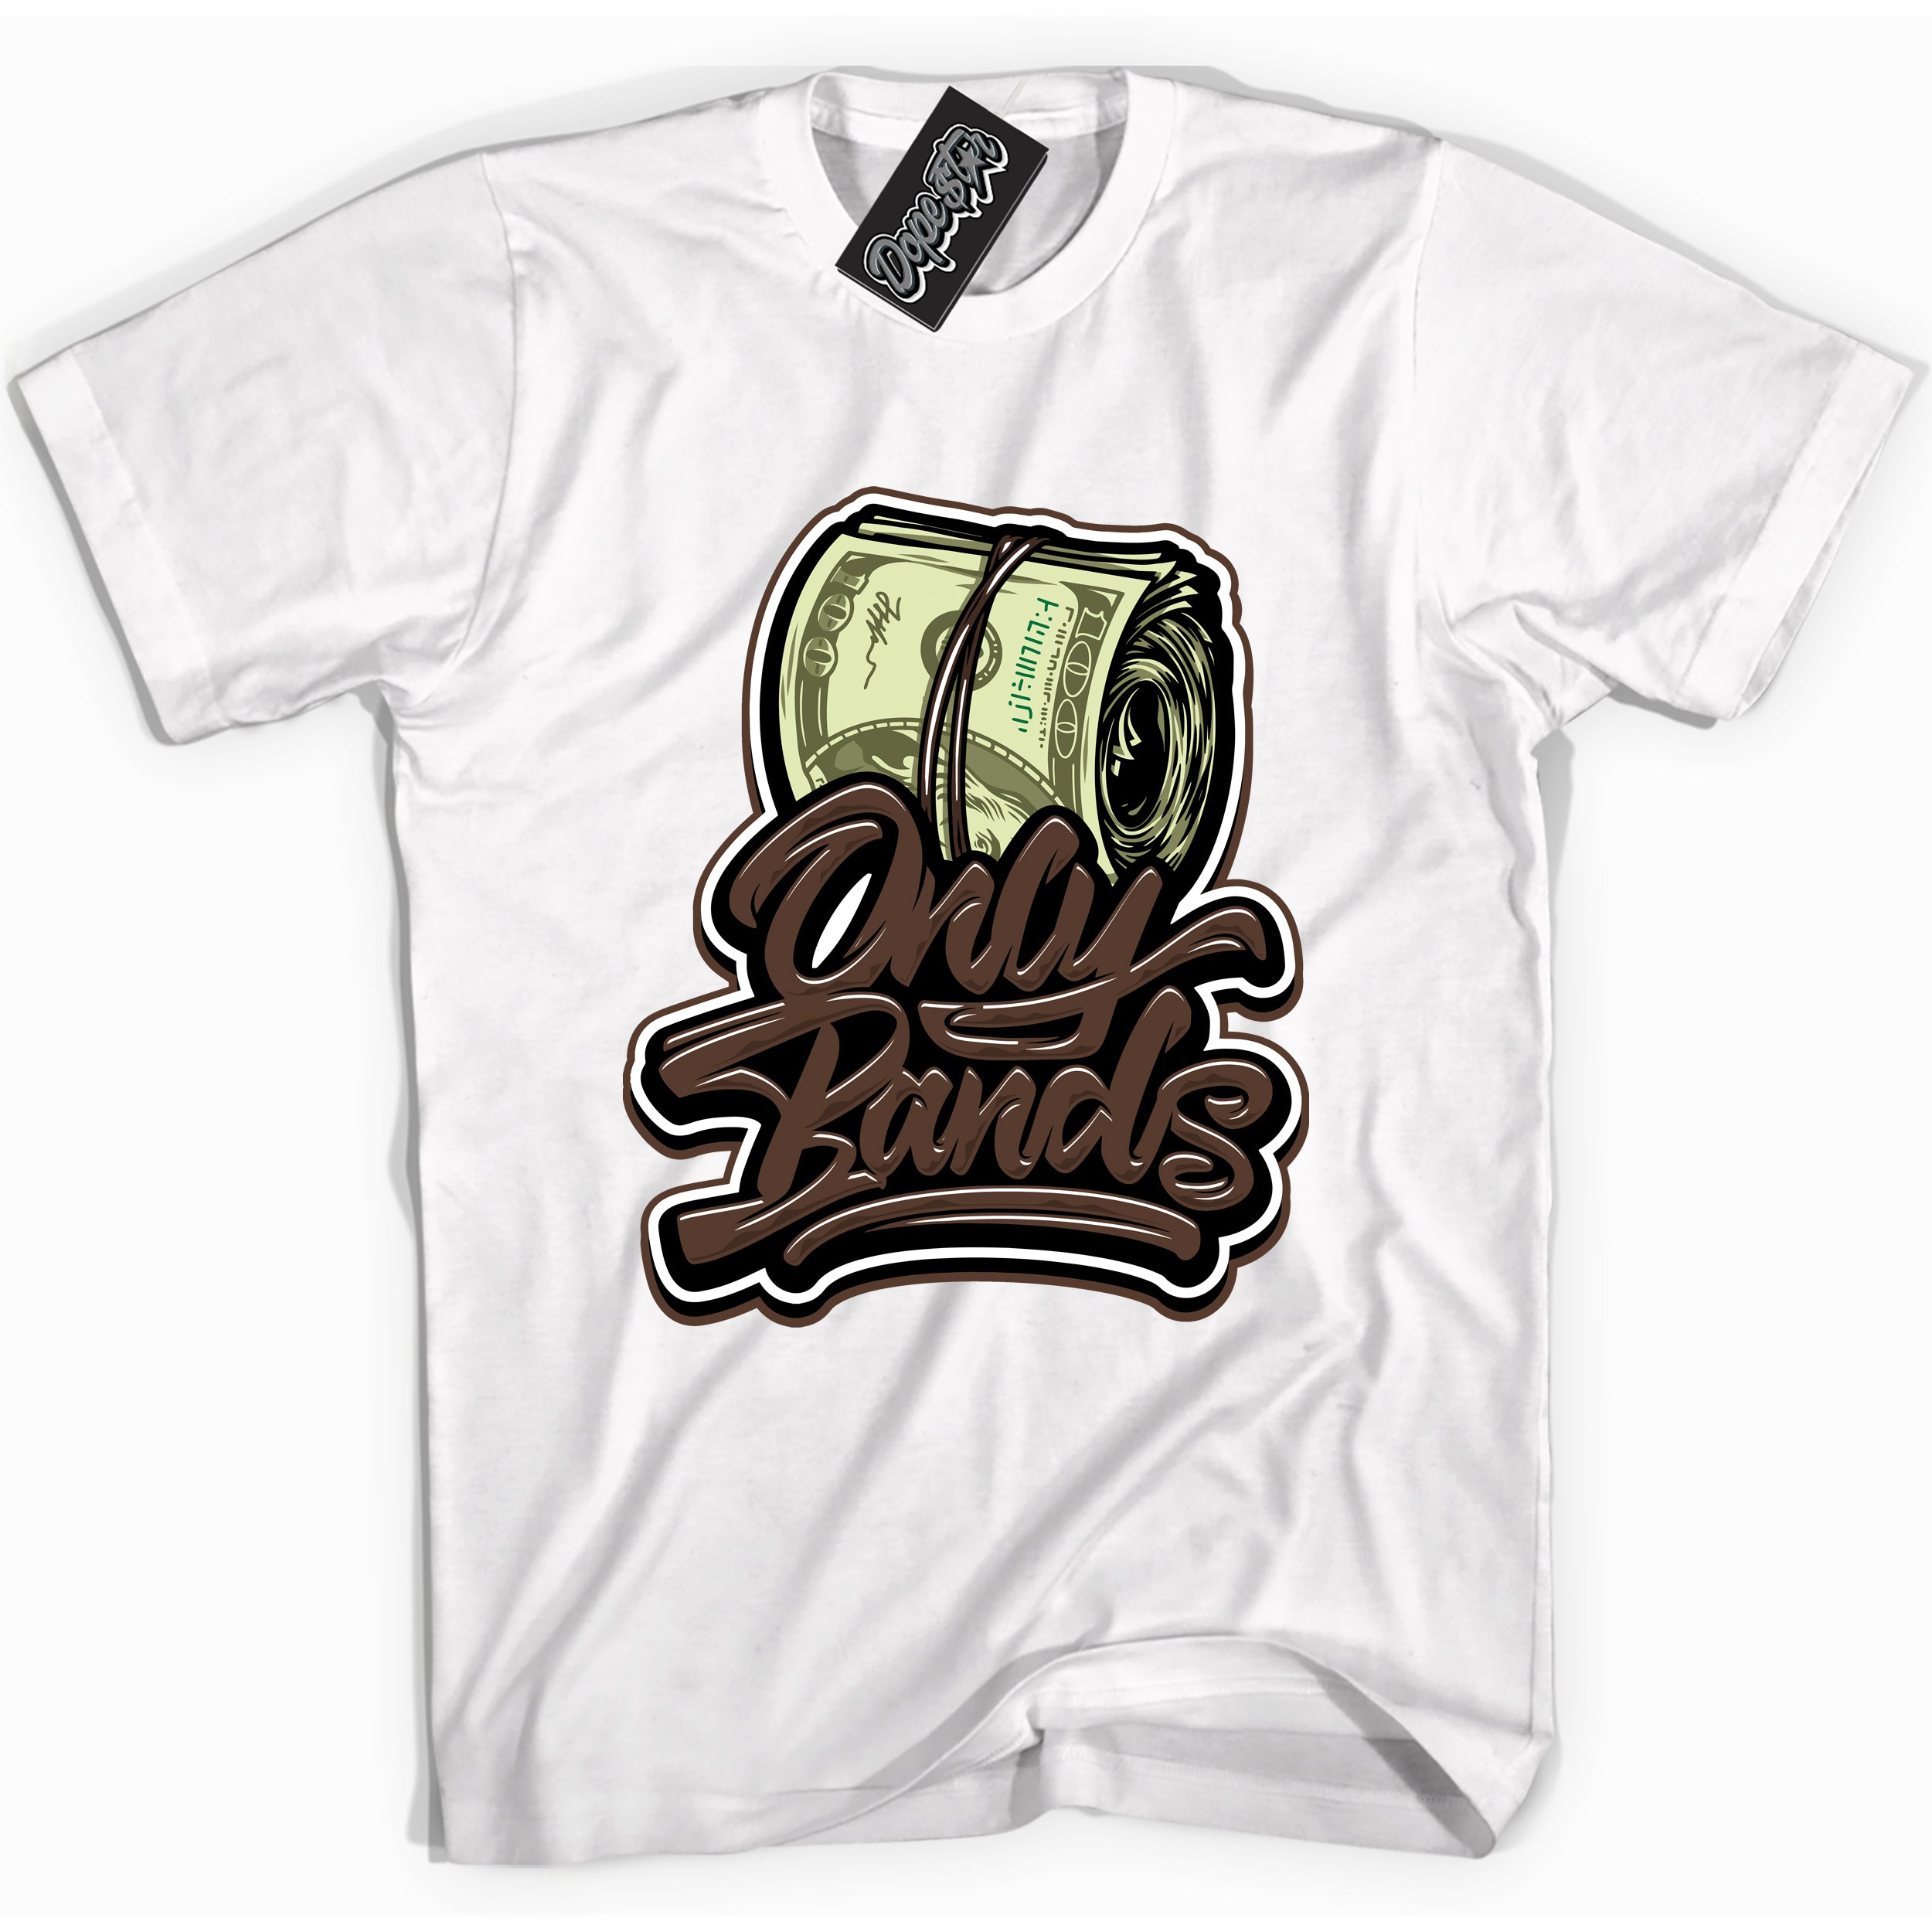 Cool White graphic tee with “ Only Bands ” design, that perfectly matches Palomino 1s sneakers 